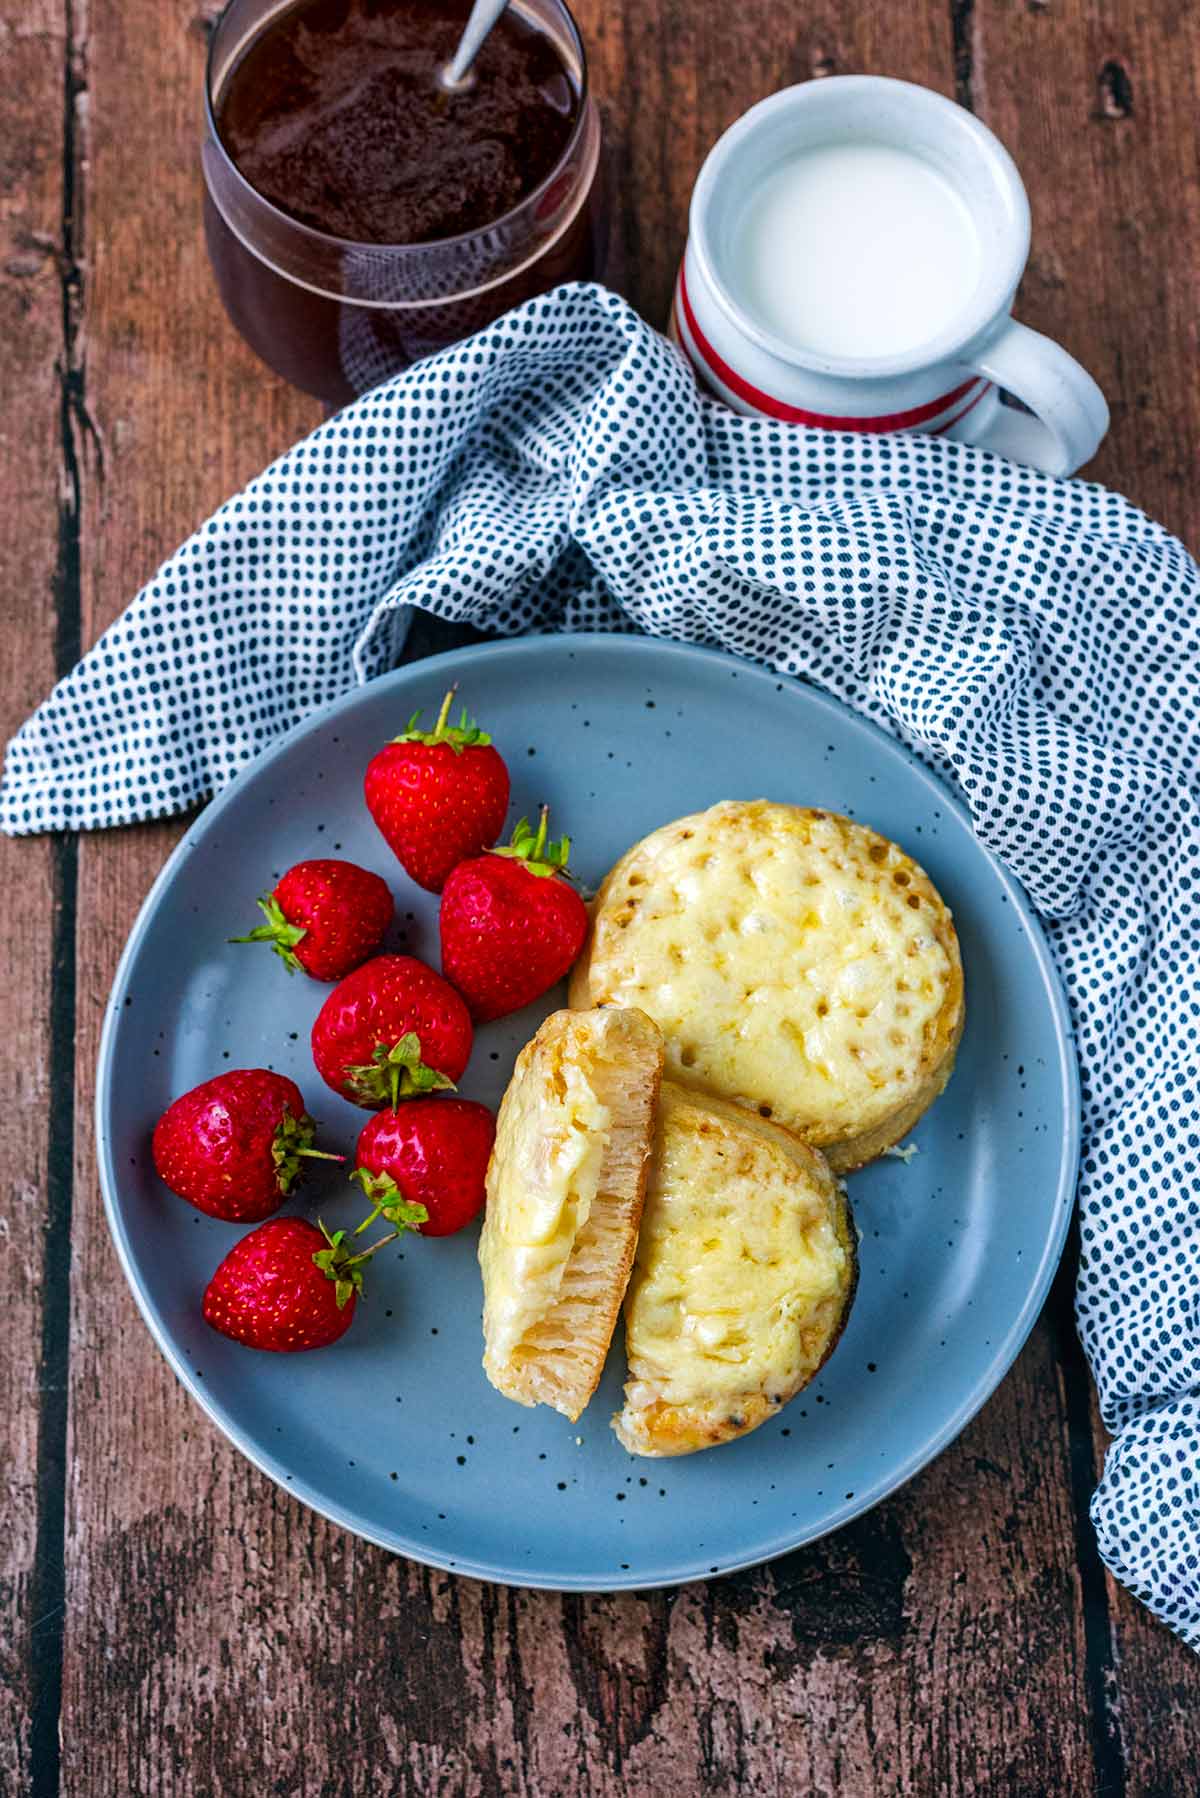 Two cheesy crumpets on a plate with some strawberries.